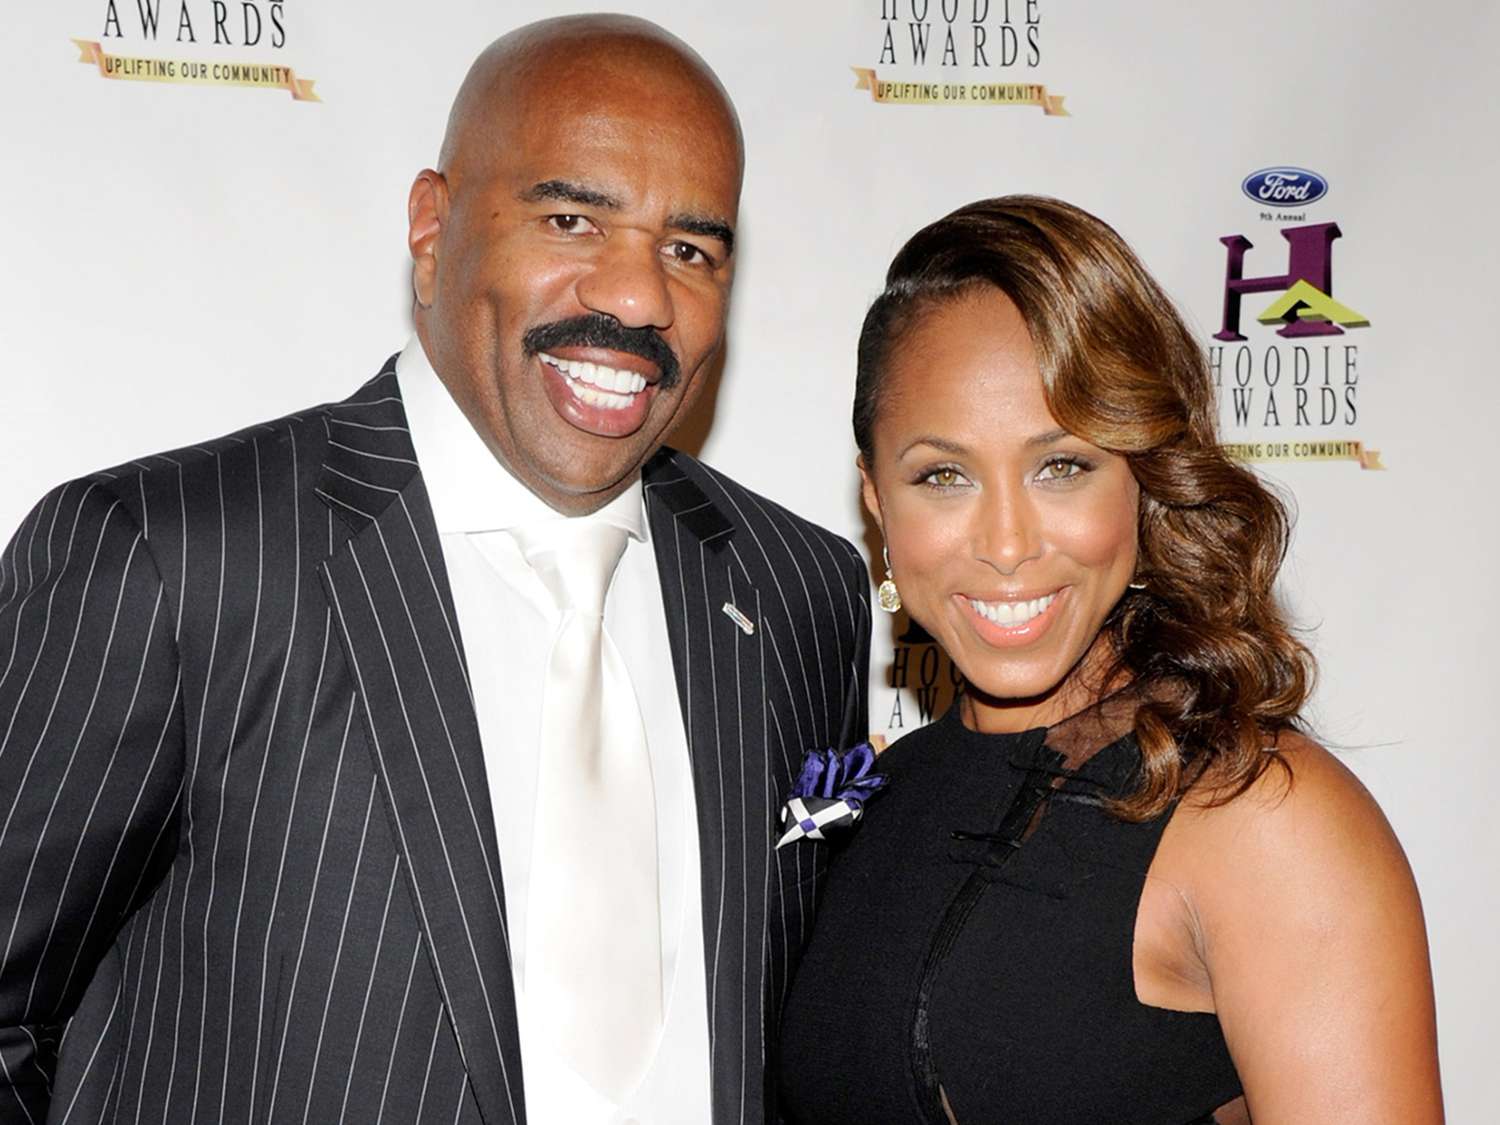 The Shade Room on Instagram: #TSRFashion--#PressPlay: OHKAY!  #SteveHarvey's wife Marjorie received a #LouisVuitton airplane bag designed  by #VirgilAbloh 🔥 We recently reported the bag earlier this year, as it  was going viral